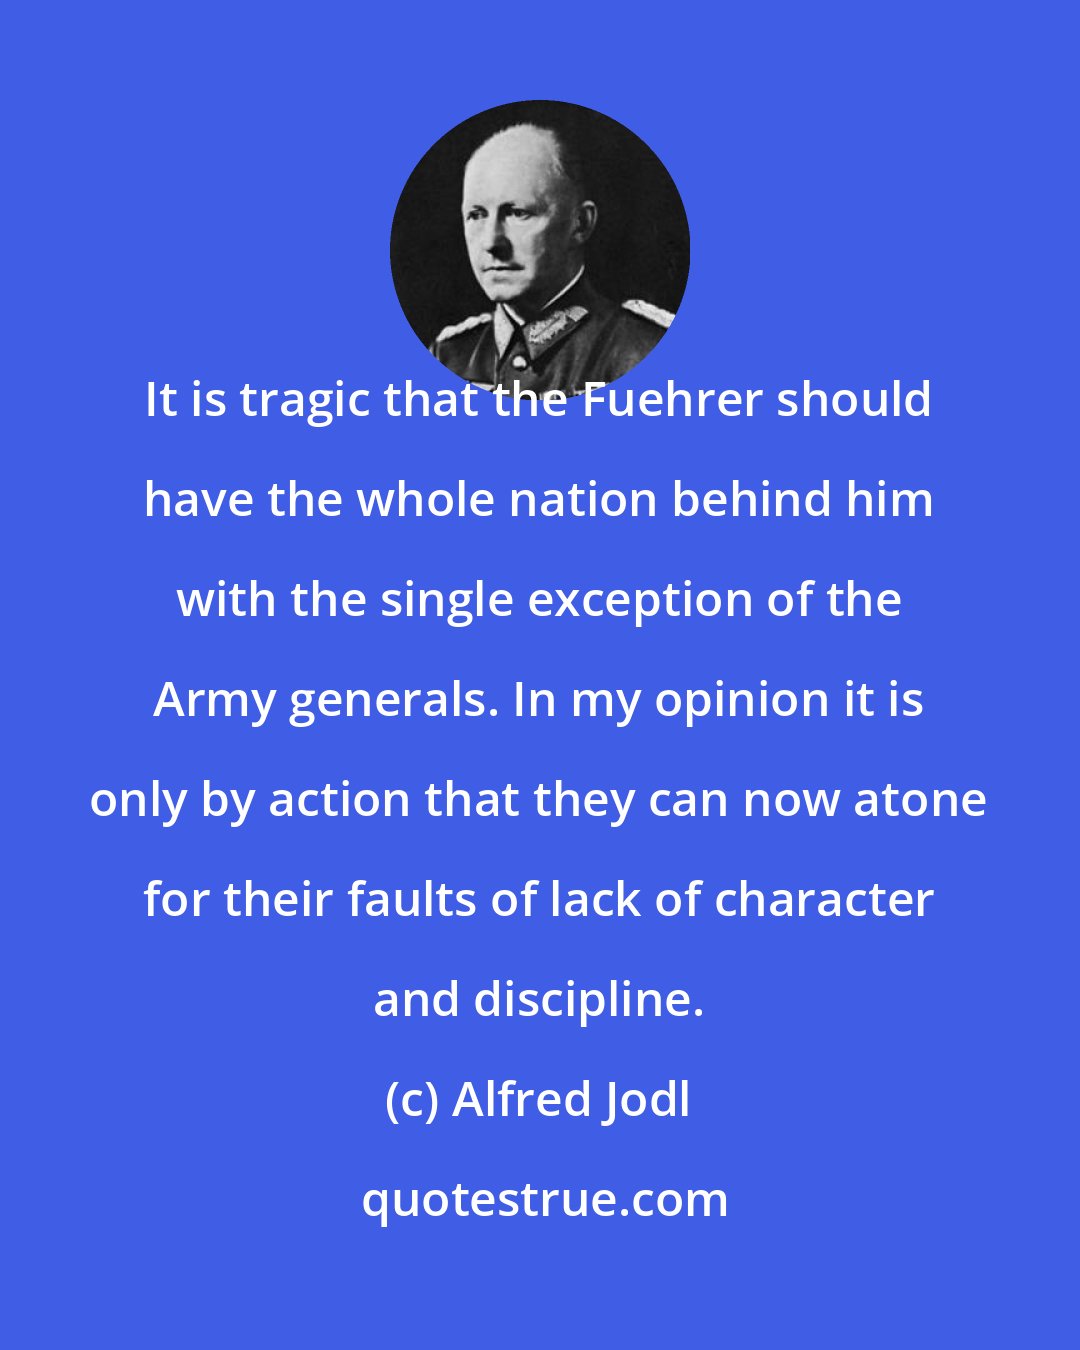 Alfred Jodl: It is tragic that the Fuehrer should have the whole nation behind him with the single exception of the Army generals. In my opinion it is only by action that they can now atone for their faults of lack of character and discipline.